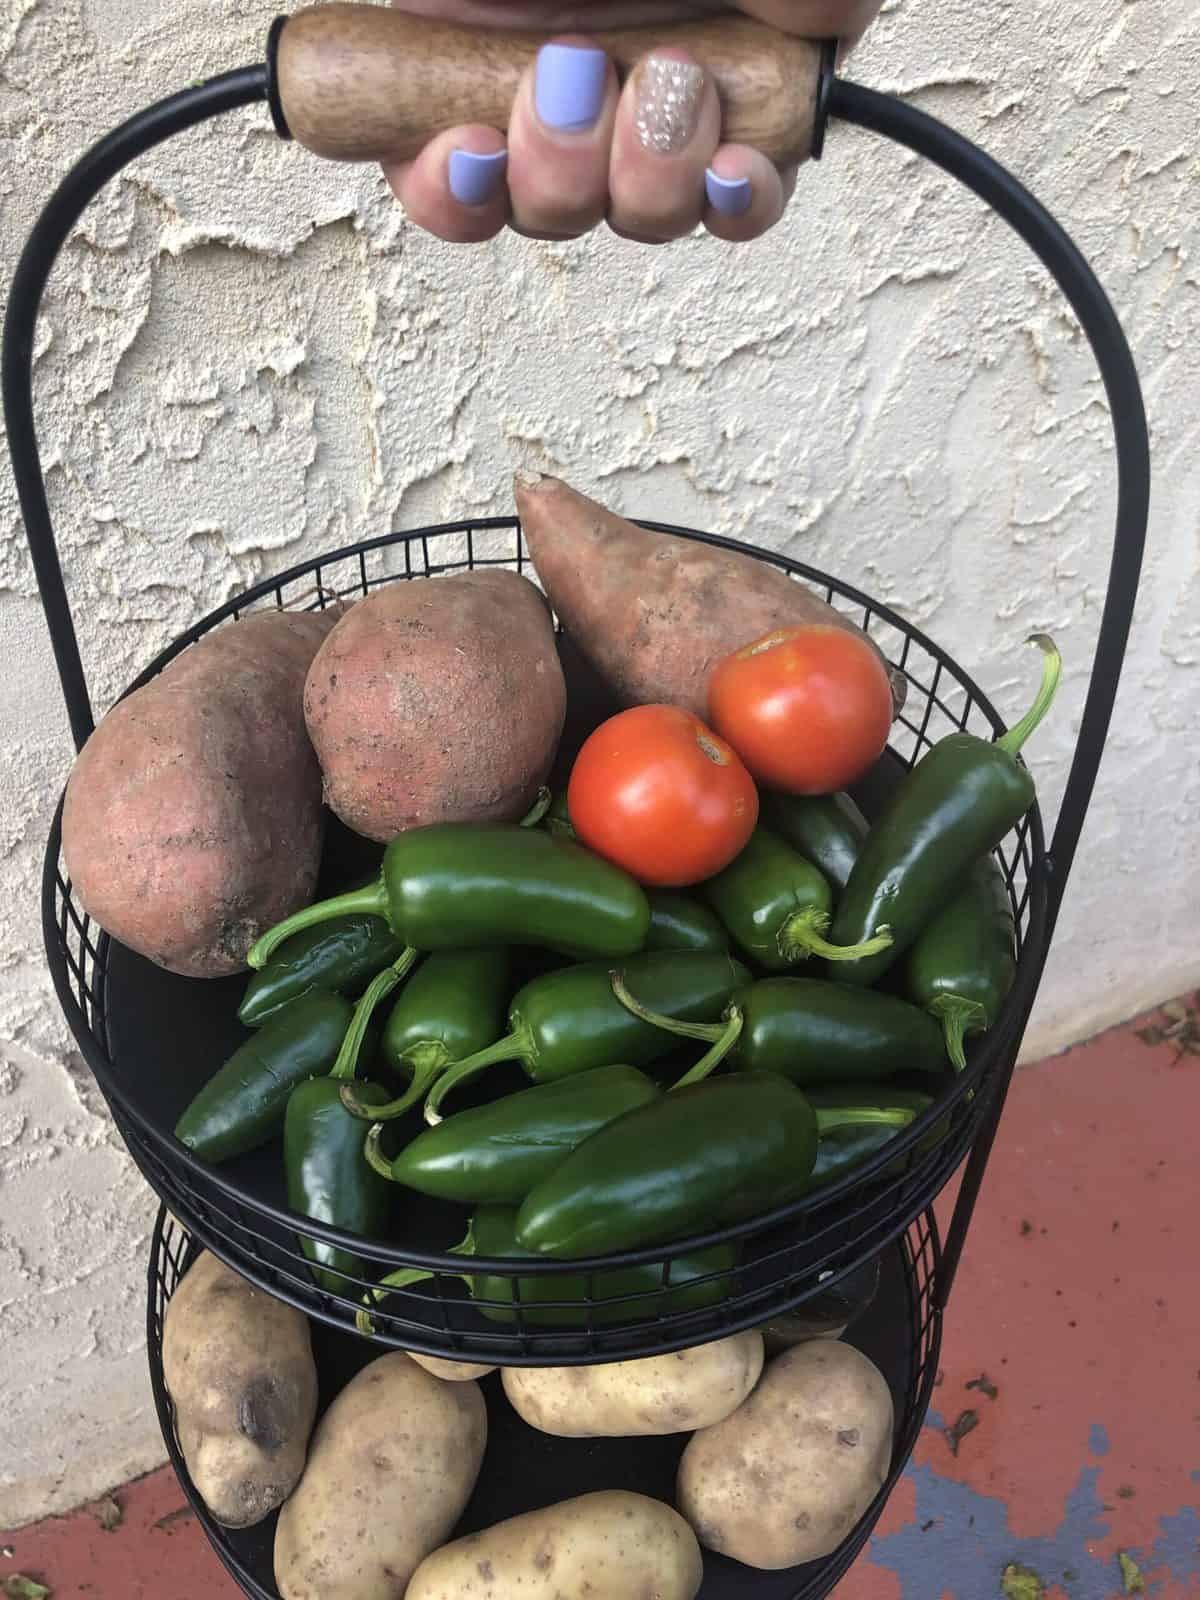 A black metal mesh basket filled with Garden Picked Jalapeños 2 tomatoes and 3 sweet potatoes being held by a hand with purple nail polish on the nails